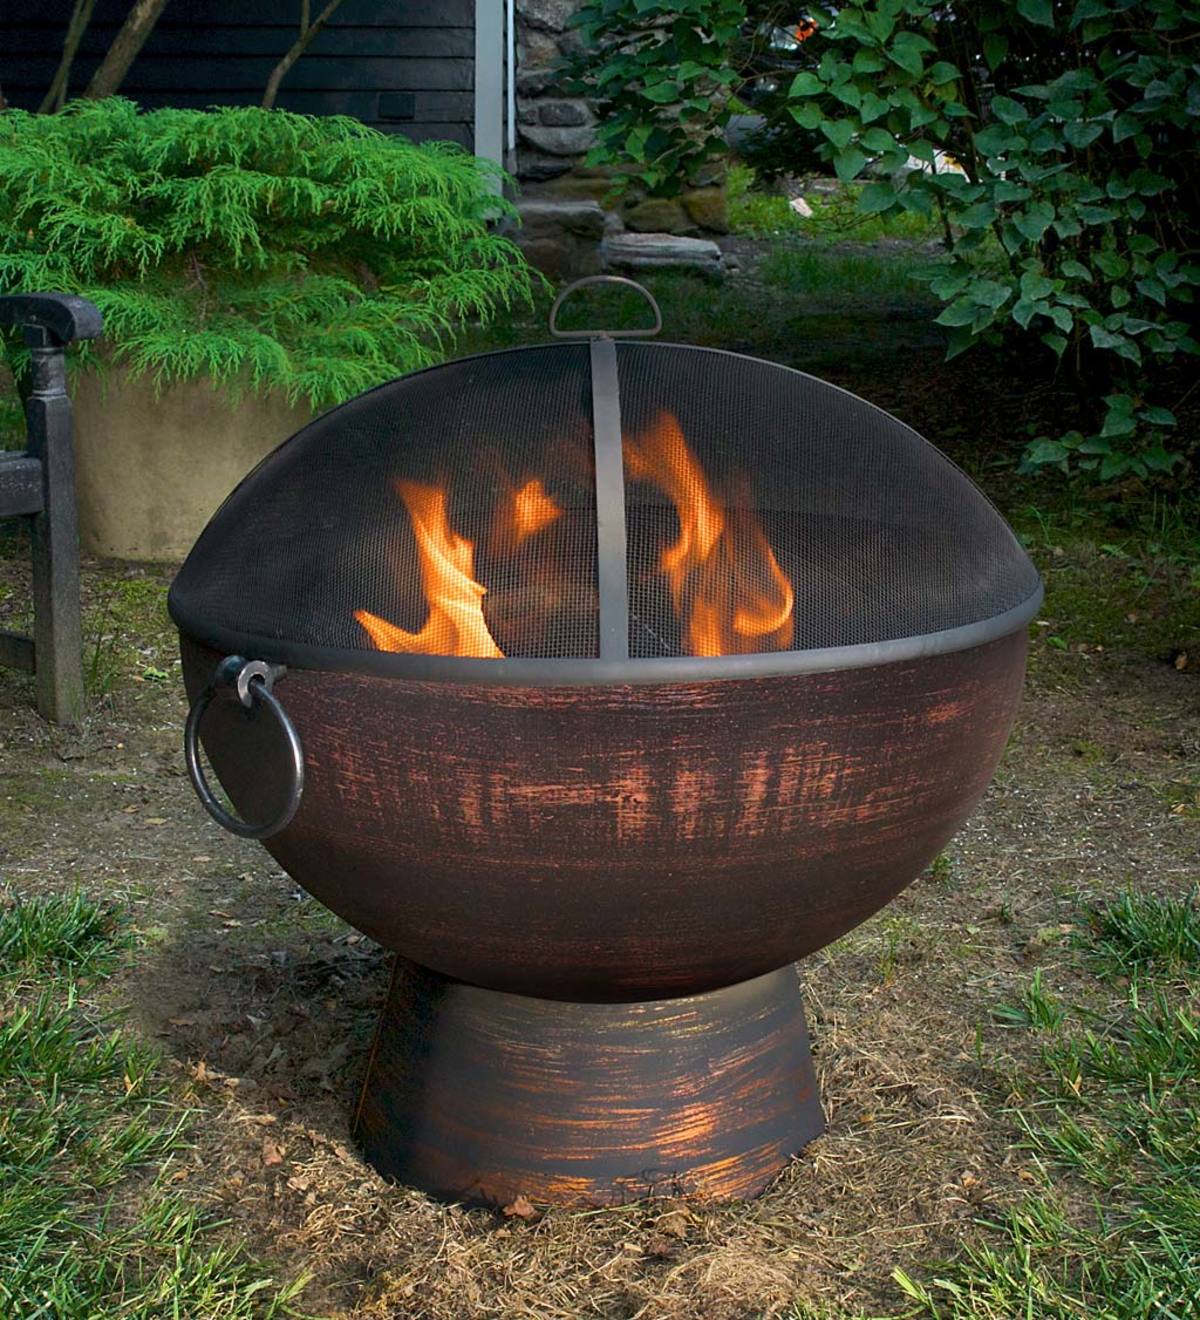 Oversized Fire Pit Bowl with Screen